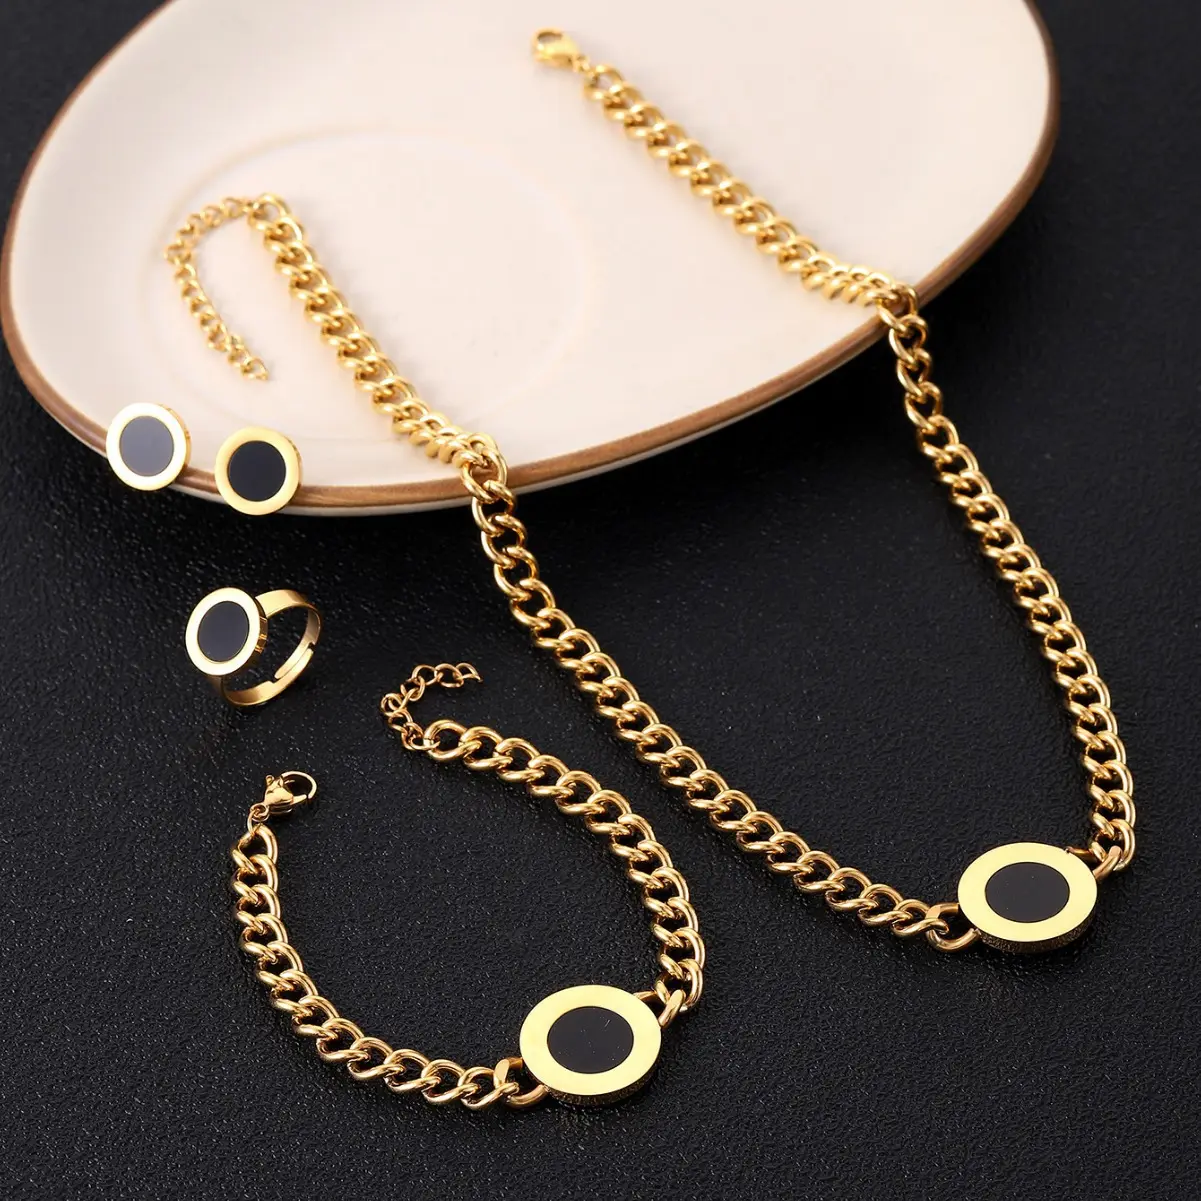 European And American Hip-Hop Retro Clavicle Chain Round Acrylic Fritillaria Titanium Steel Thick Chain Necklace Set